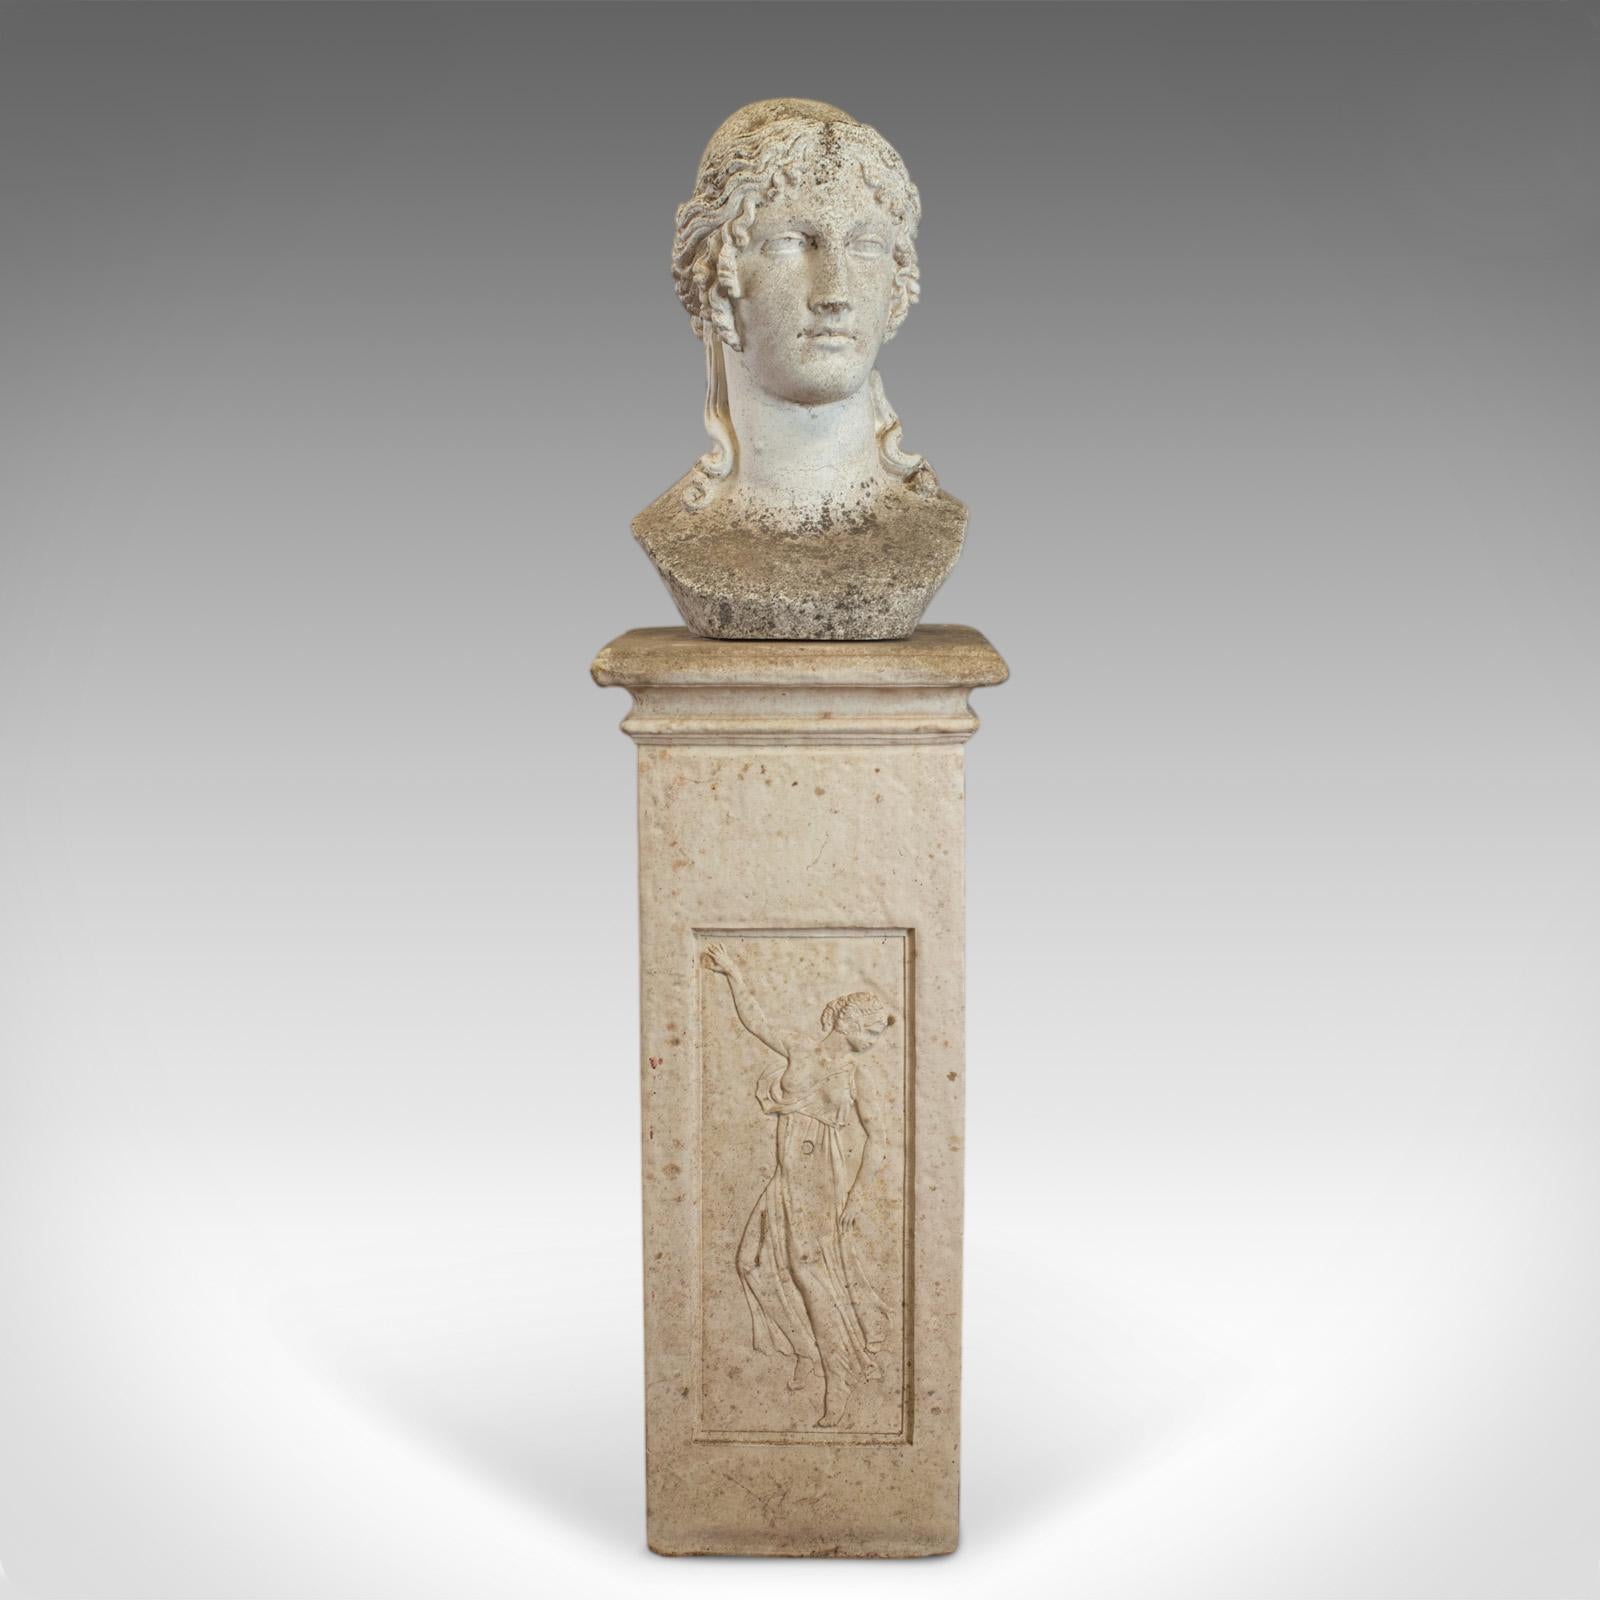 This is an antique bust on pedestal. An Italian, classical revival garden sculpture depicting a female pose. Beautifully formed in reconstituted stone and dating to the early 20th century, circa 1910. 

A detailed bust displaying desirable